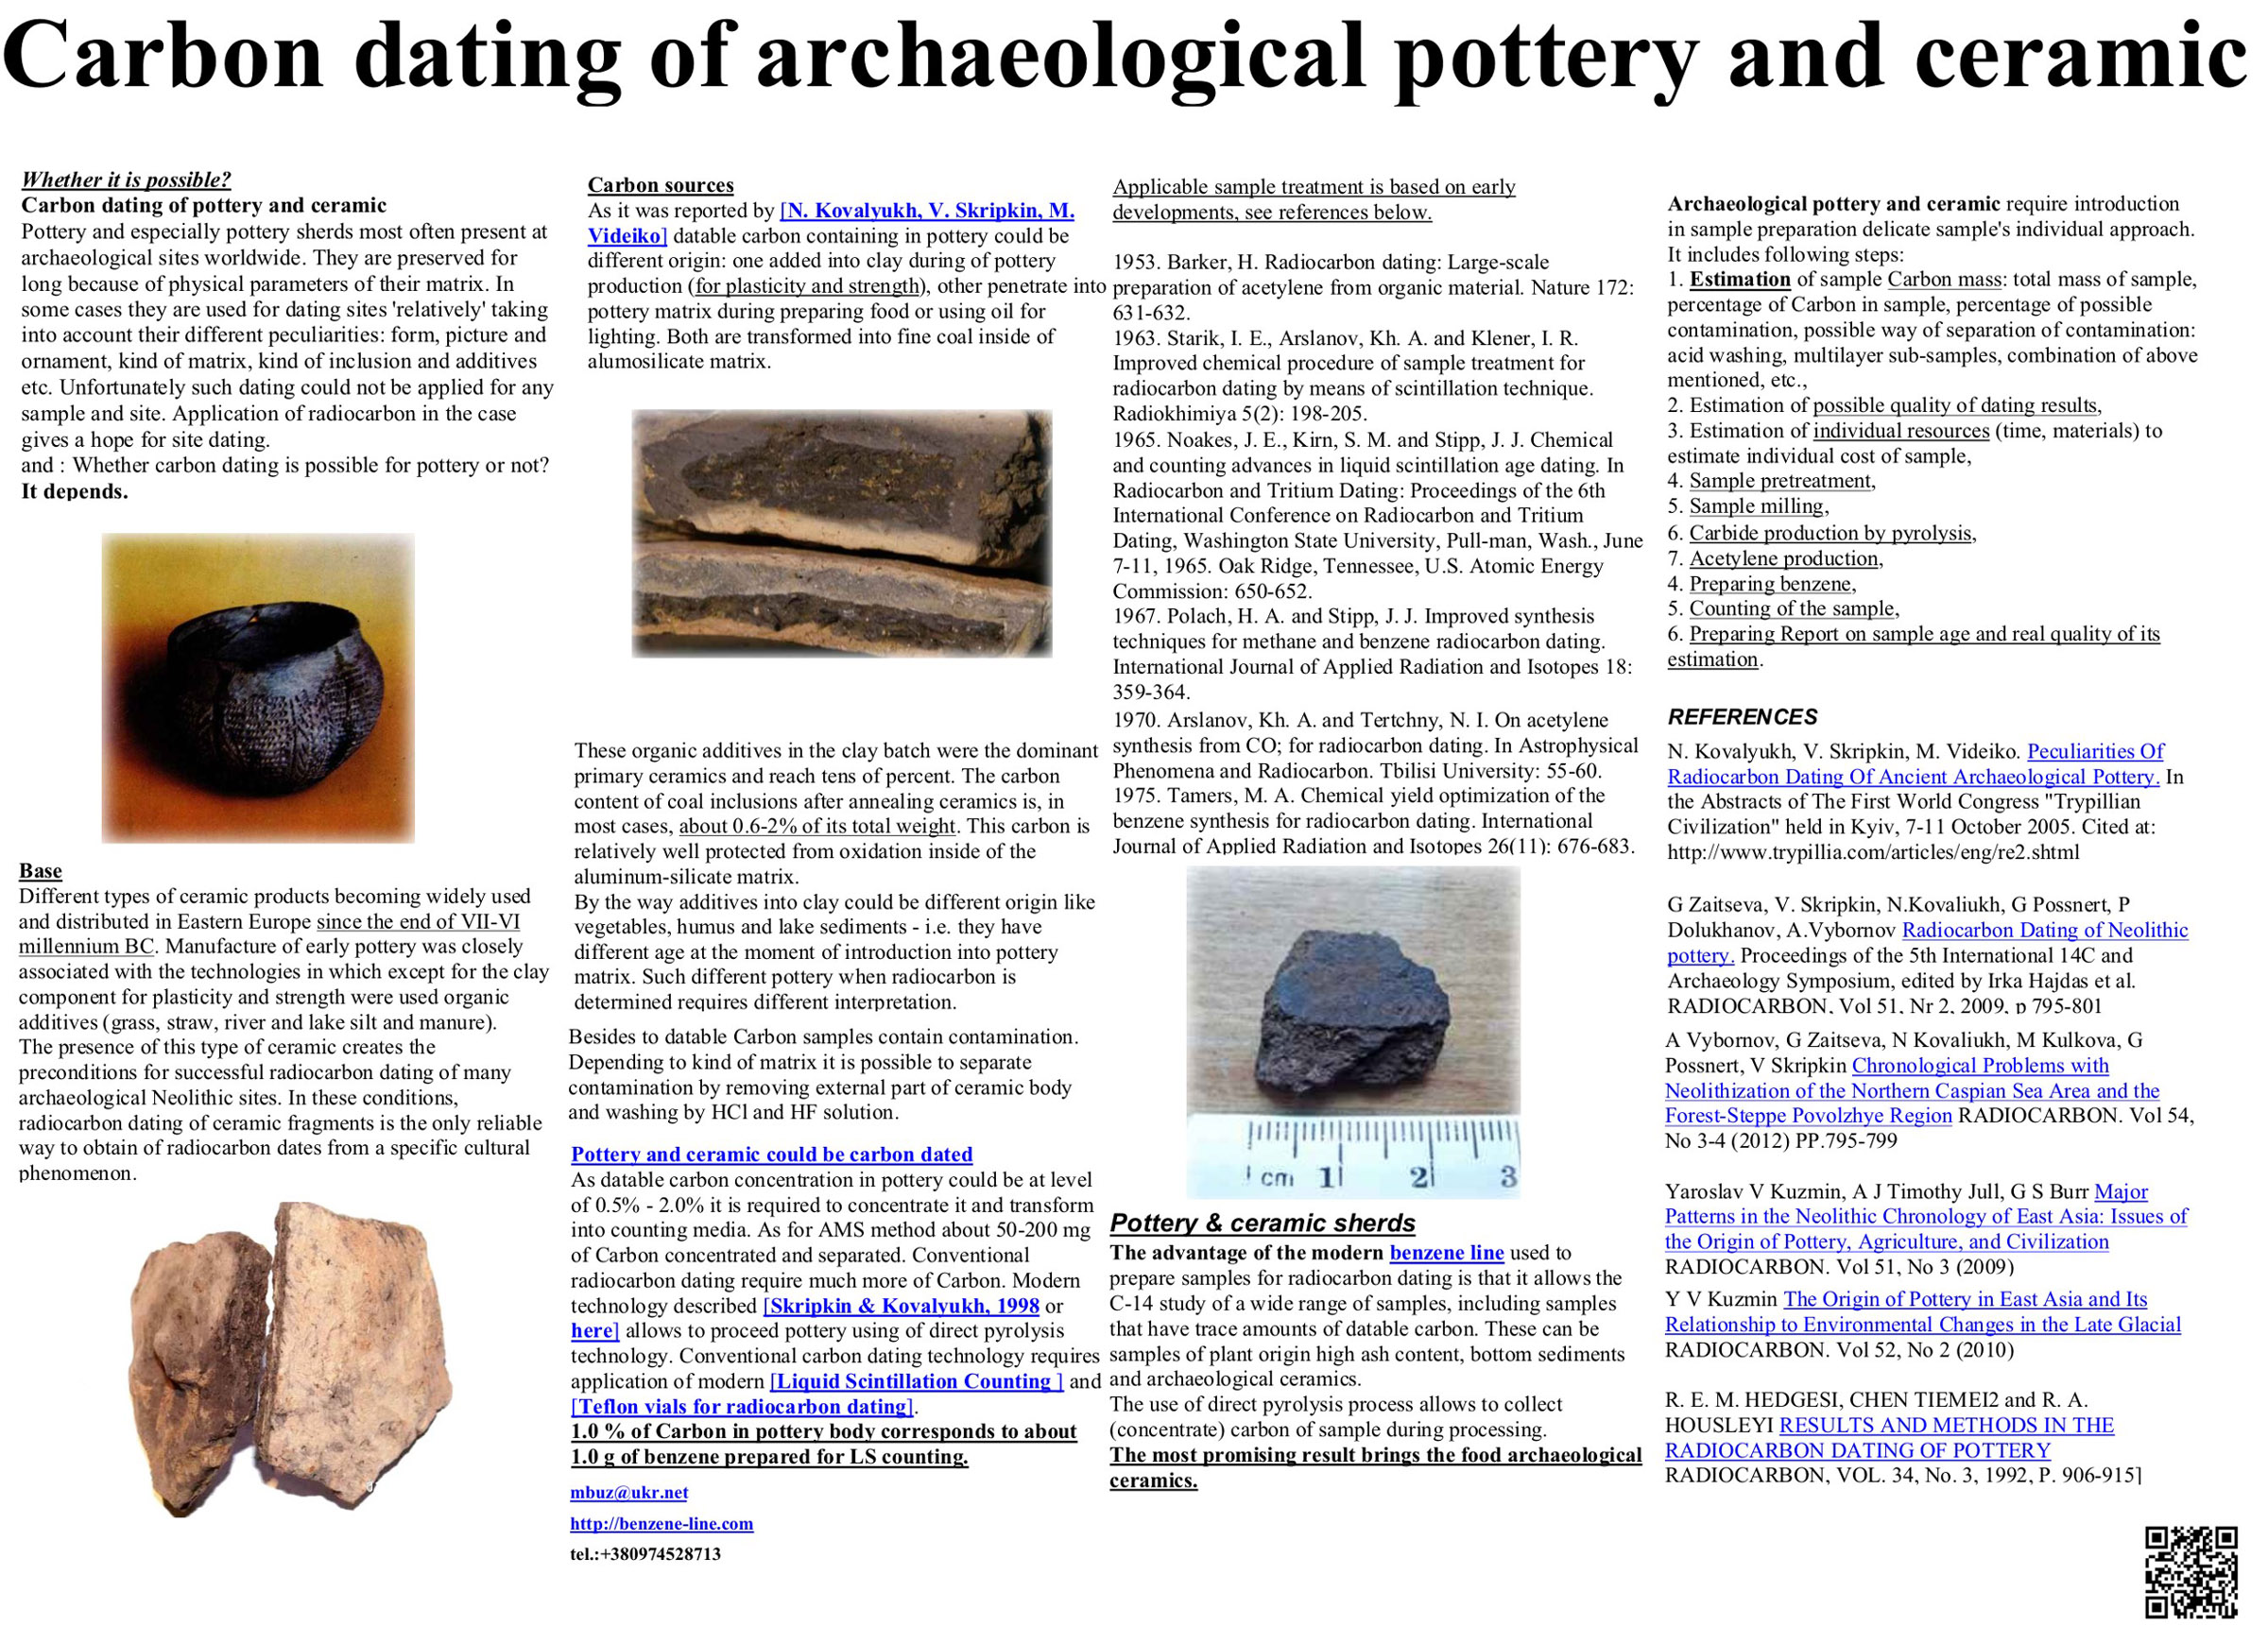 radiocarbon dating pottery